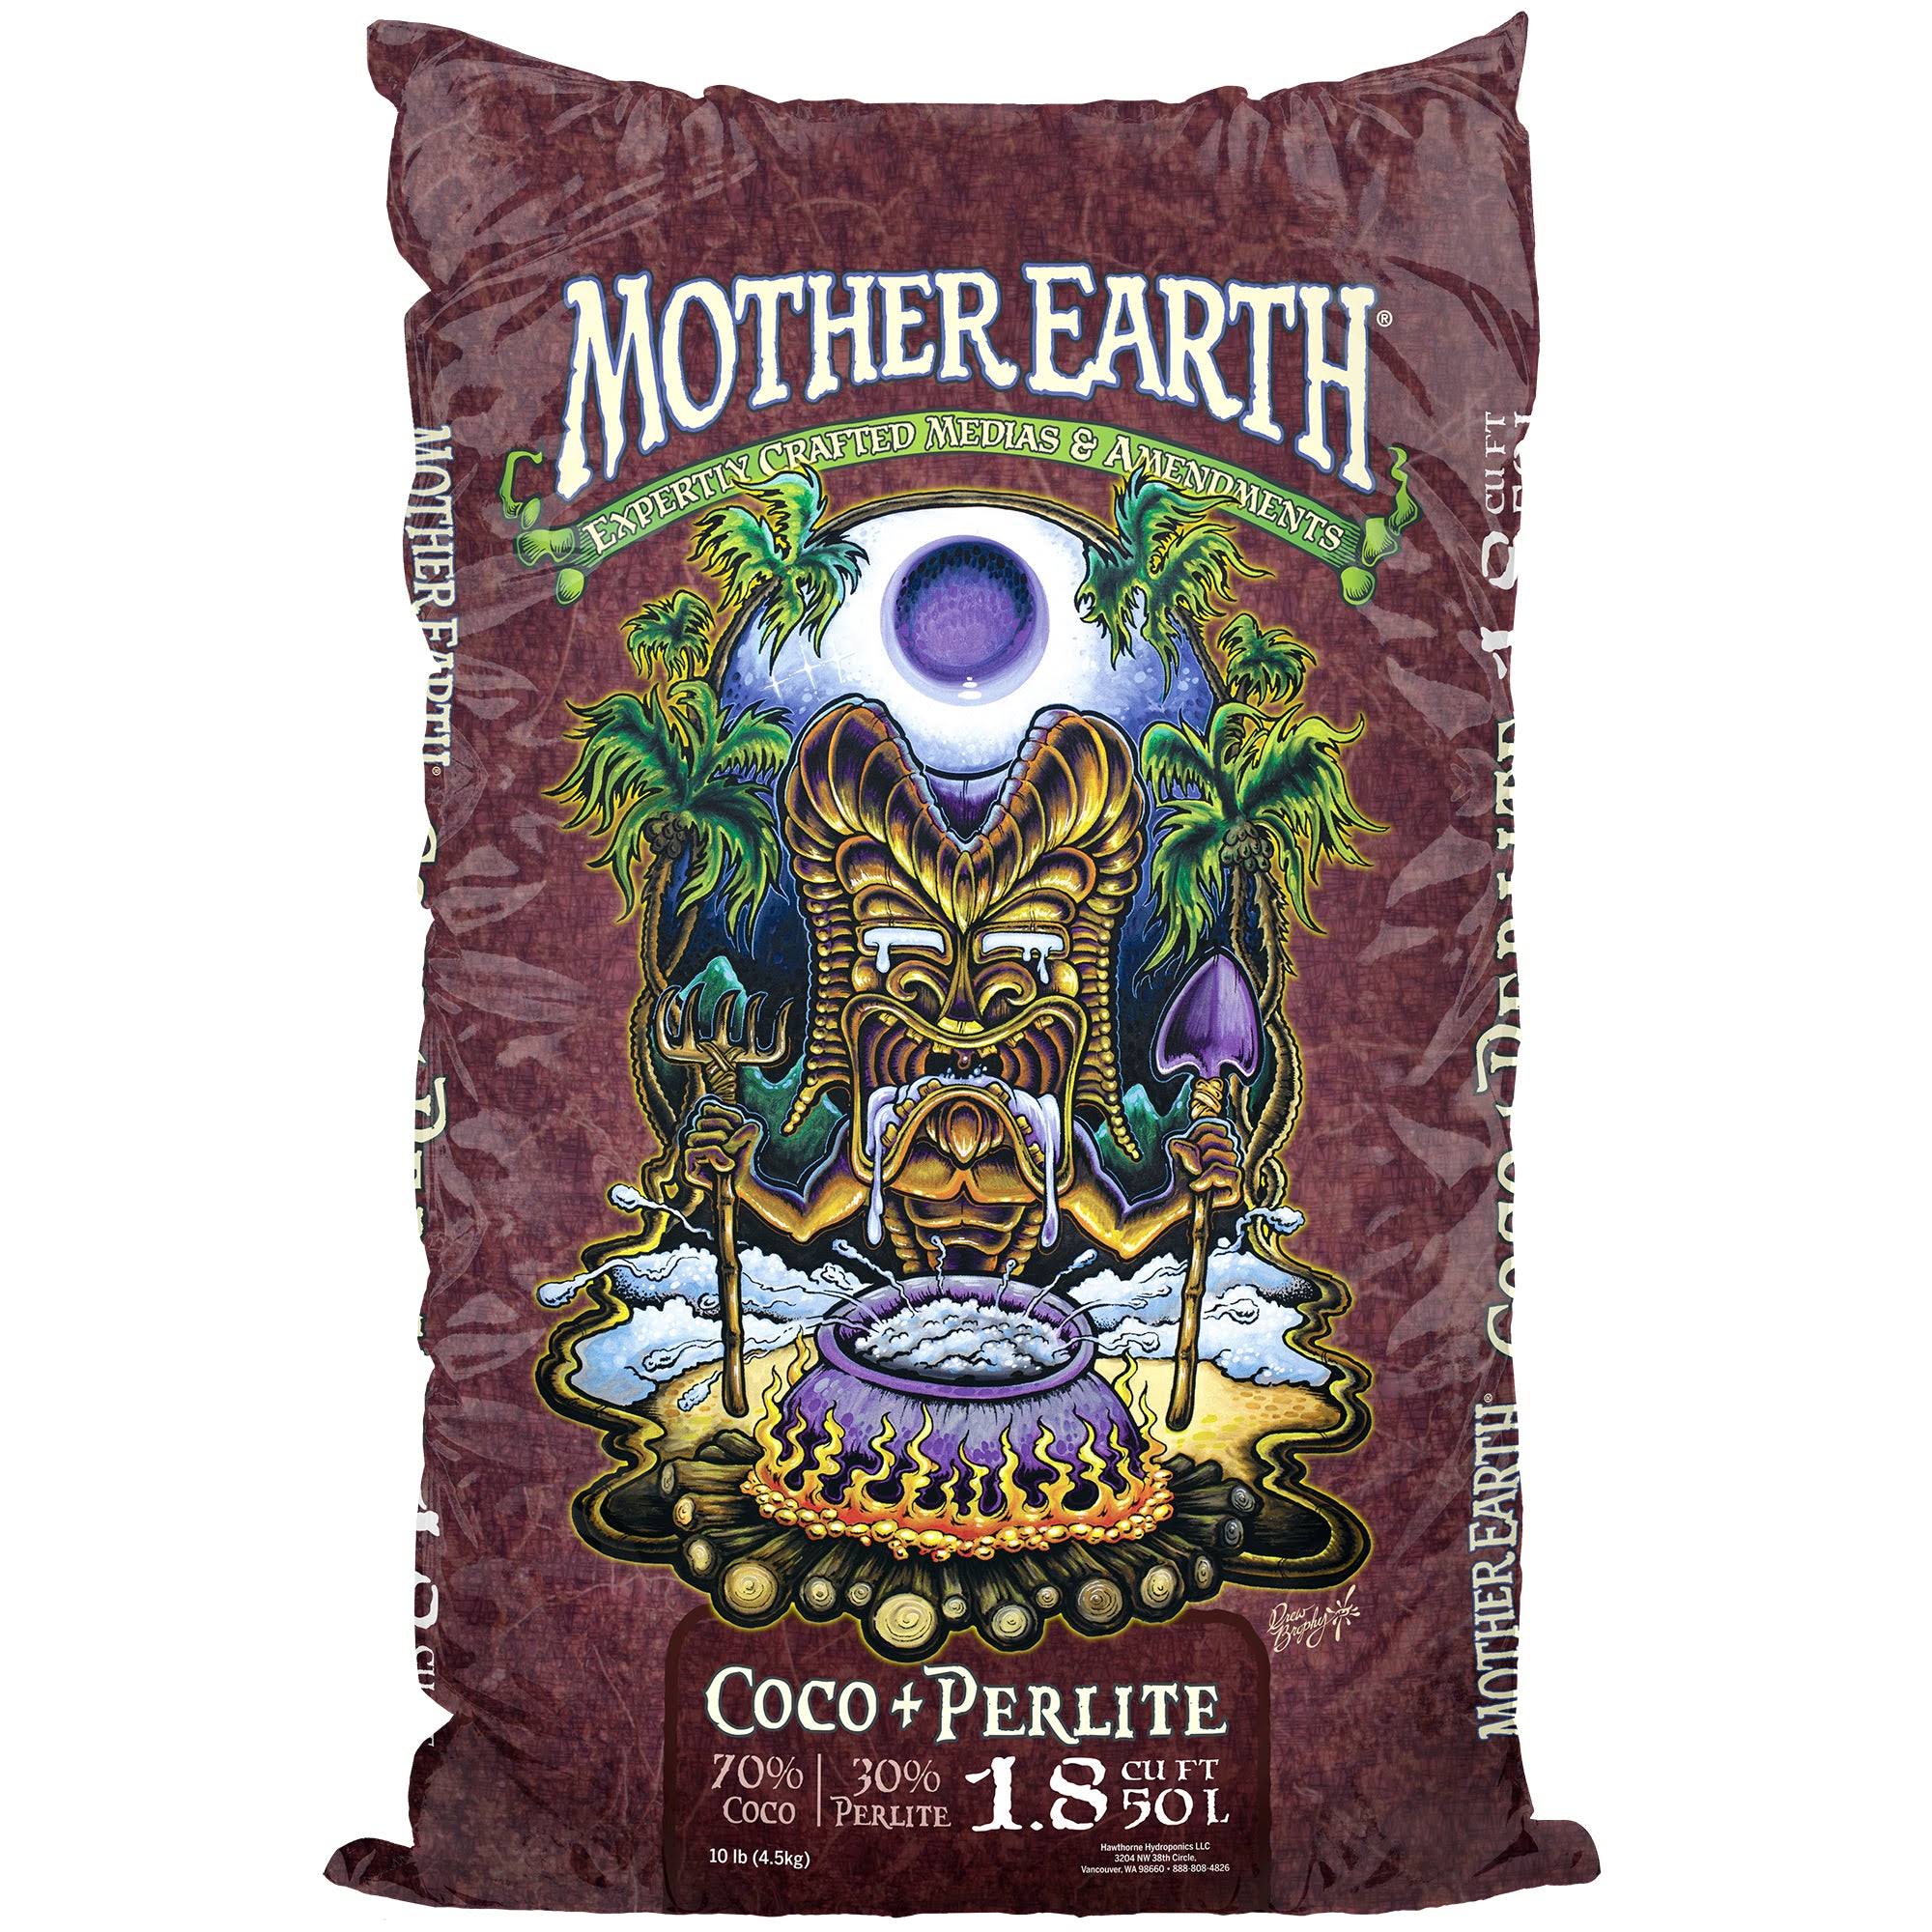 Mother Earth Coco + Perlite 1.8CF by GrowDaddy